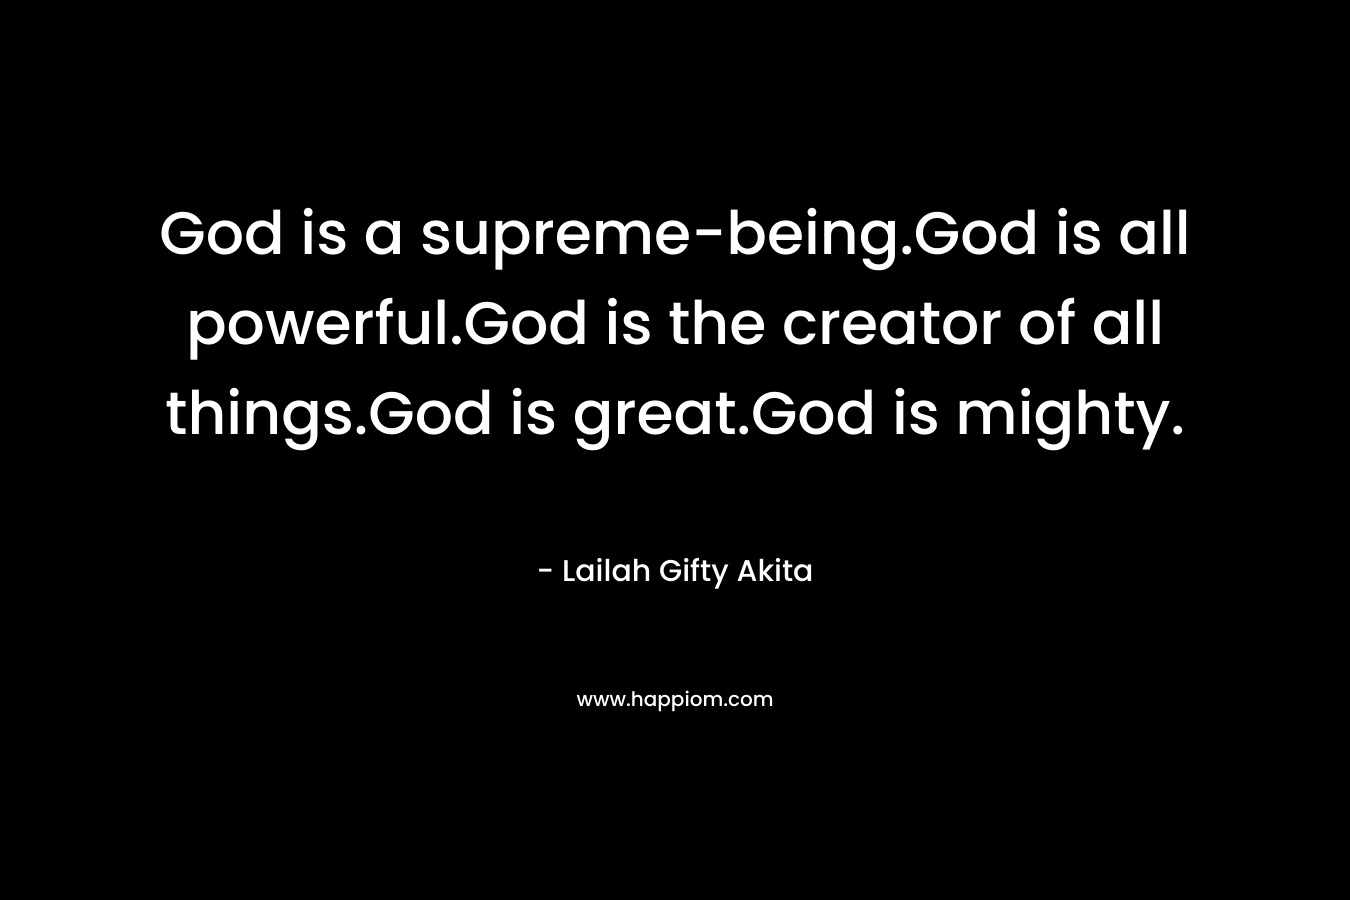 God is a supreme-being.God is all powerful.God is the creator of all things.God is great.God is mighty. – Lailah Gifty Akita